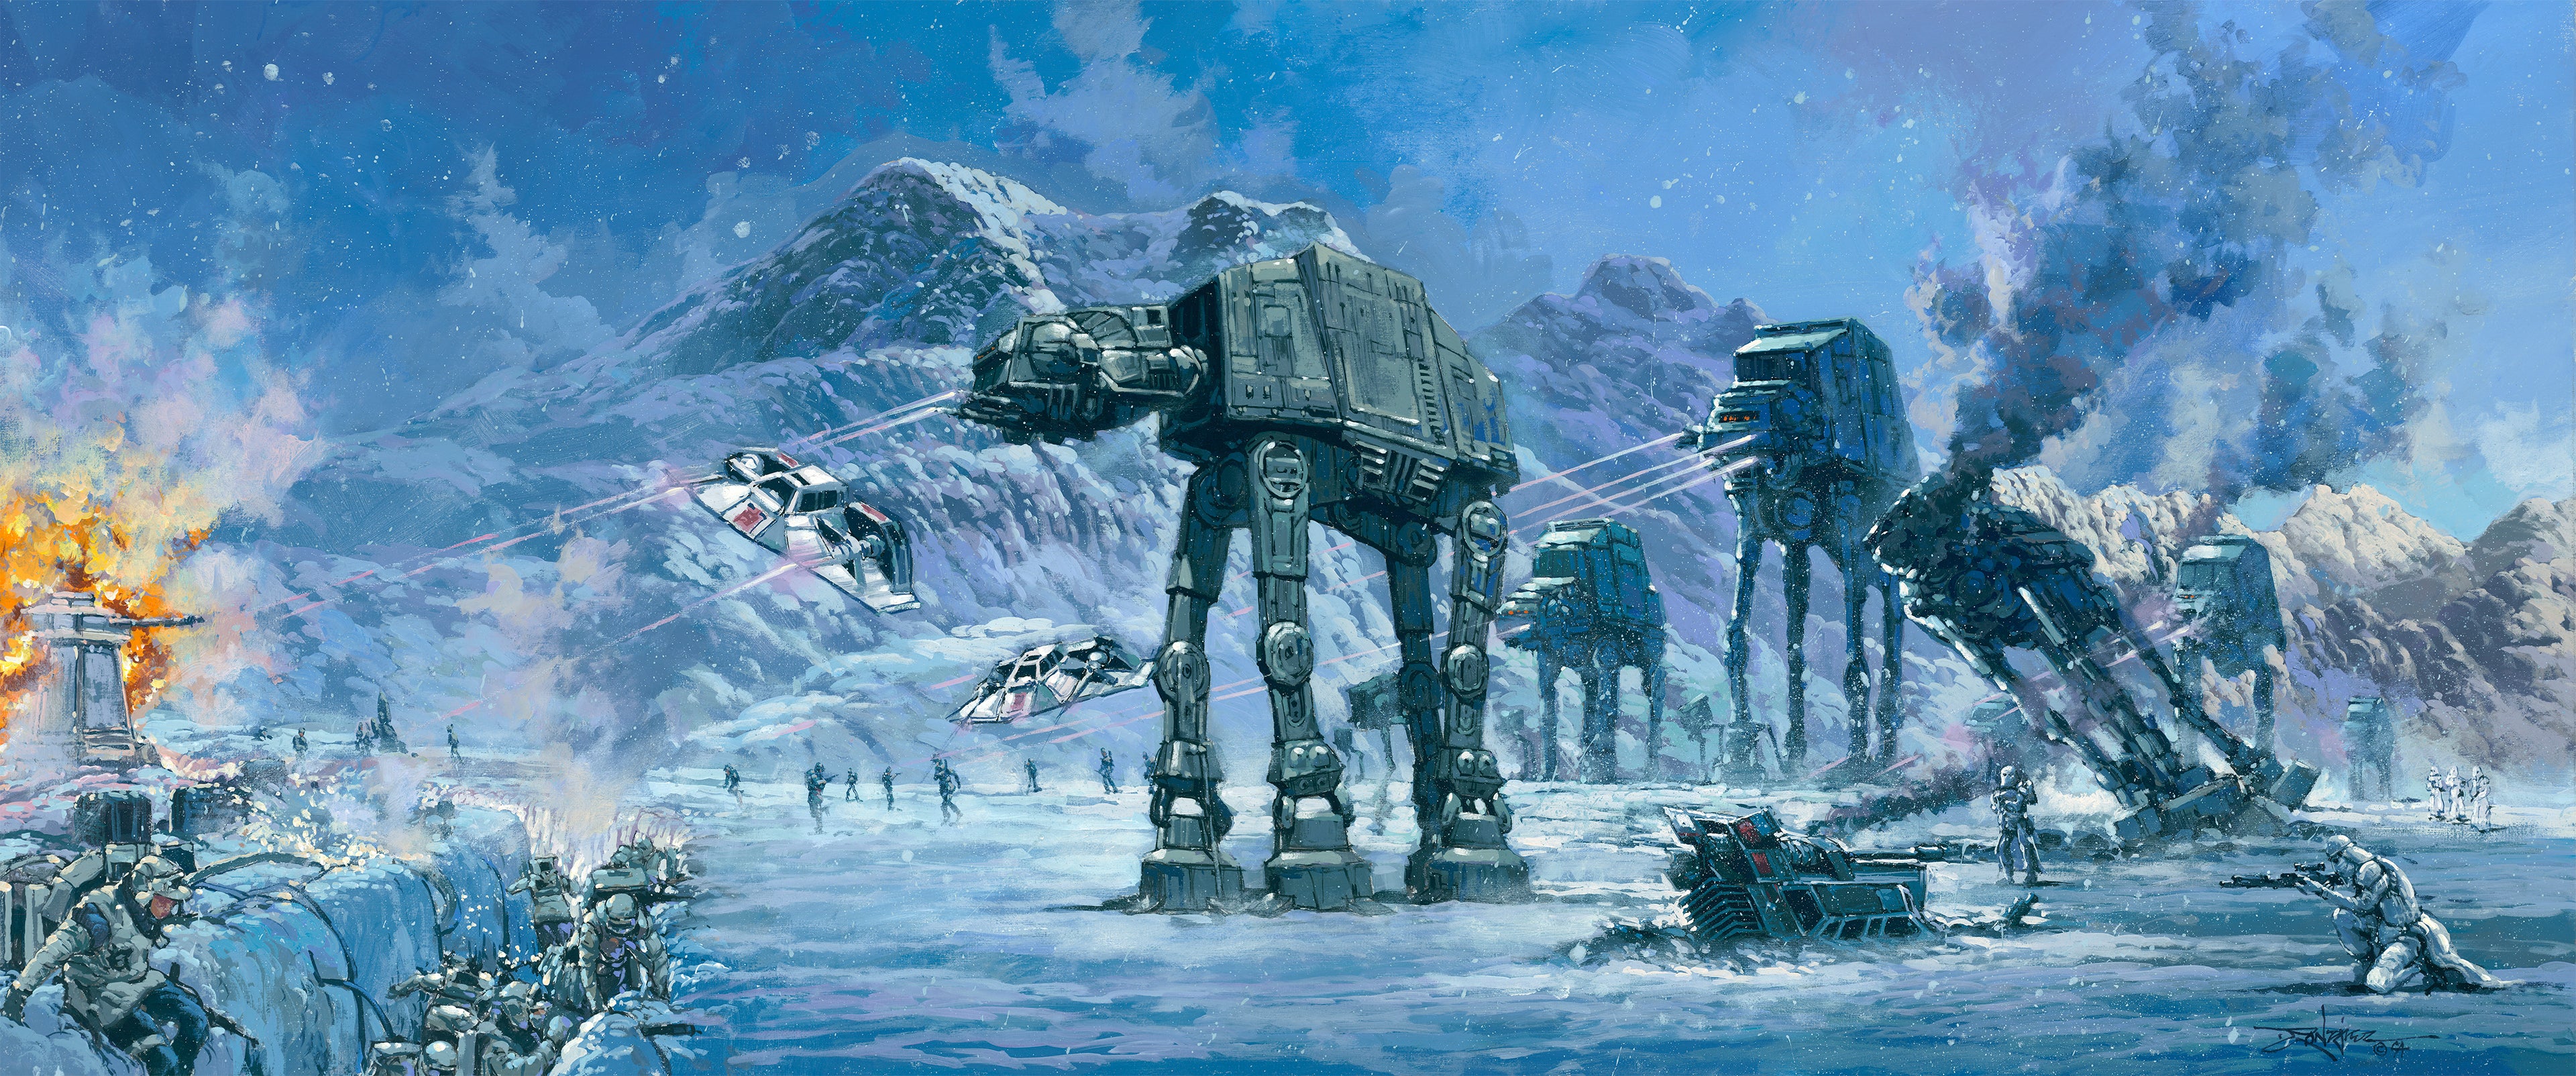 Battle of Planet Hoth (Large)